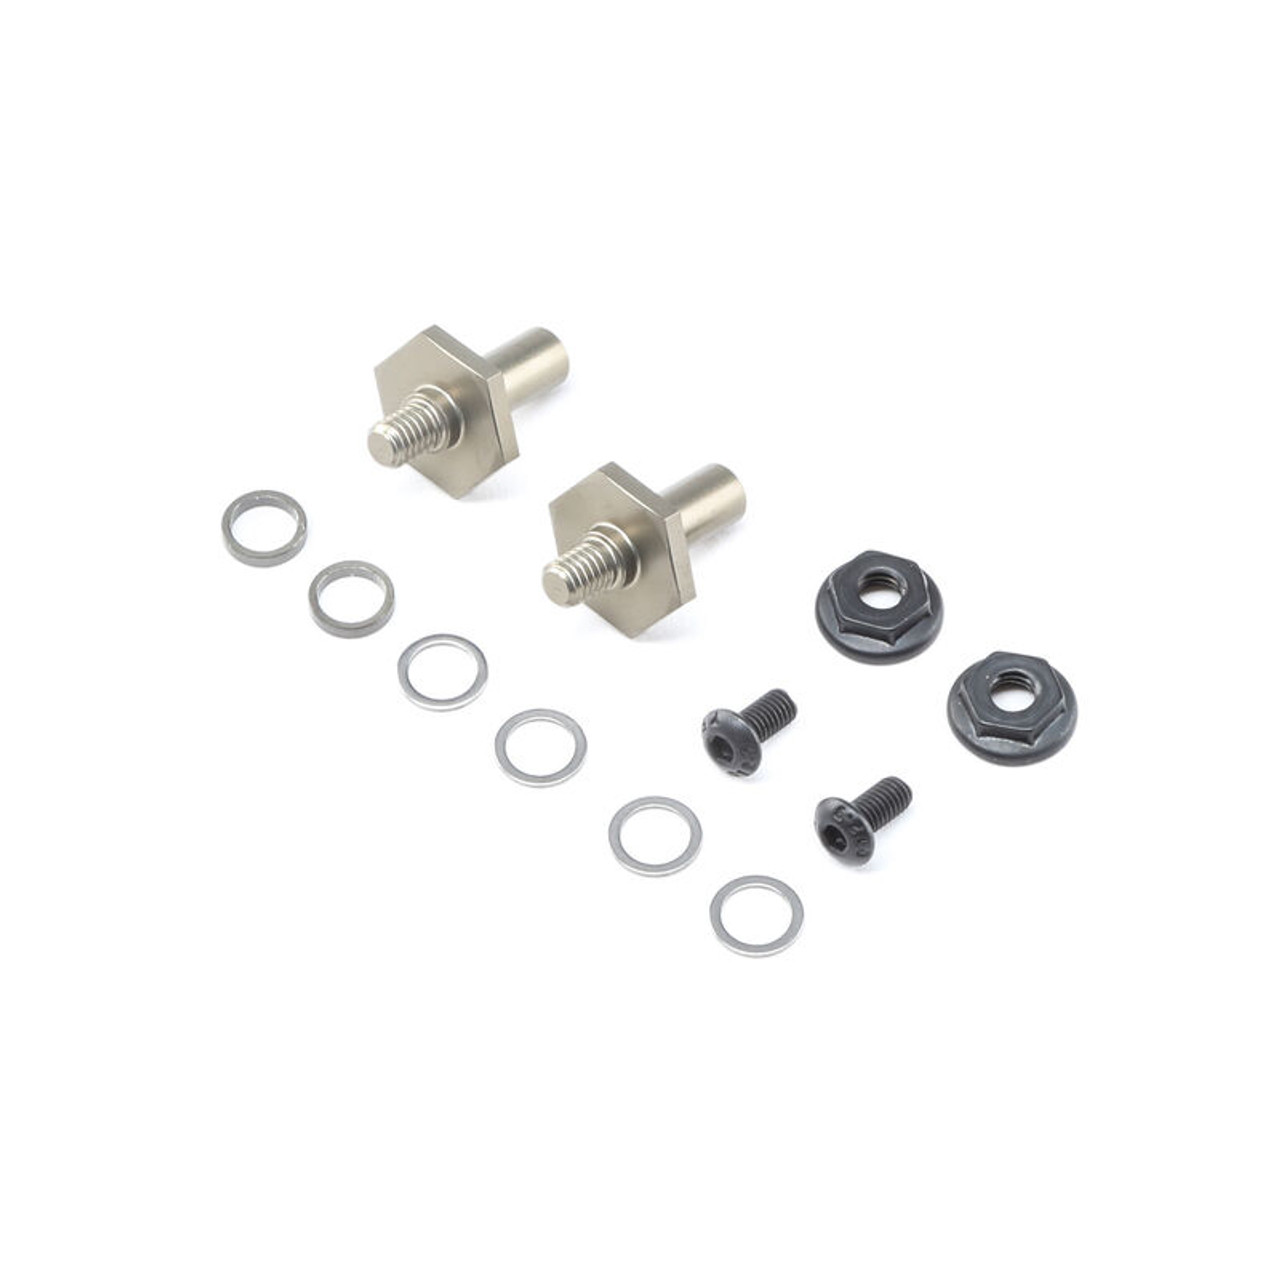 TLR Gear Set, G2 Gear Diff, Composite: 22